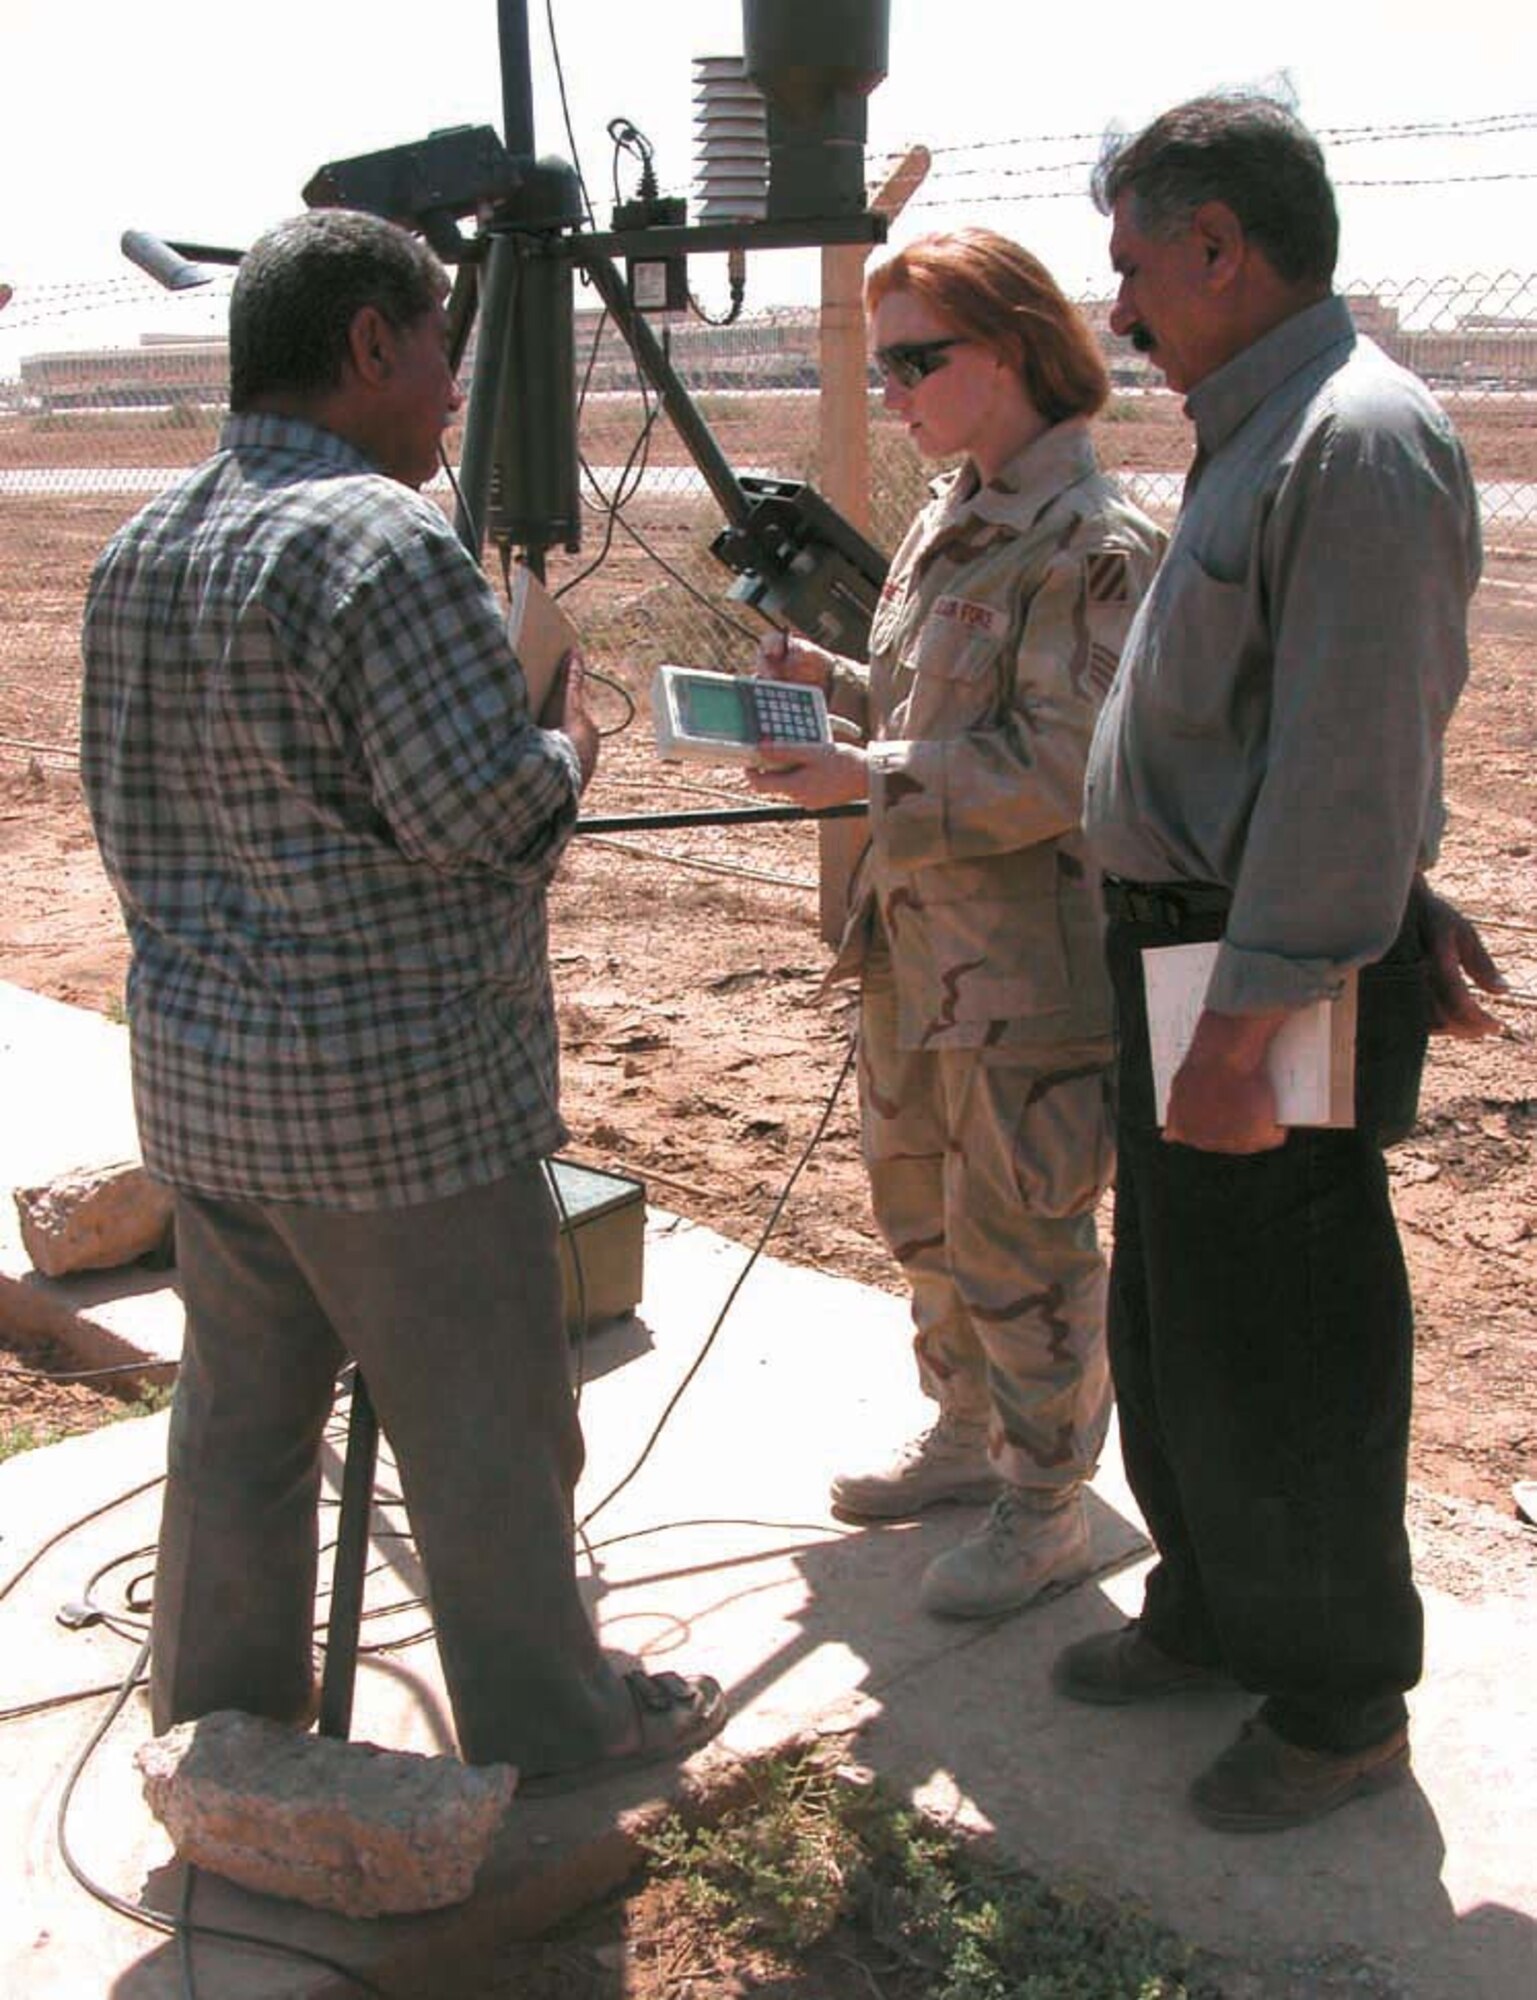 OPERATION IRAQI FREEDOM -- Staff Sgt. Julie Moretto show two members of Iraq's meteorological organization how to detect thunderstorms and lightning.  Moretto is a 447th Air Expeditionary Group airman deployed to Baghdad from the 15th Air Support Operations Squadron at Hunter Army Air Field, Ga.  (U.S. Air Force photo by 2nd Lt. Rebecca R. Garland)